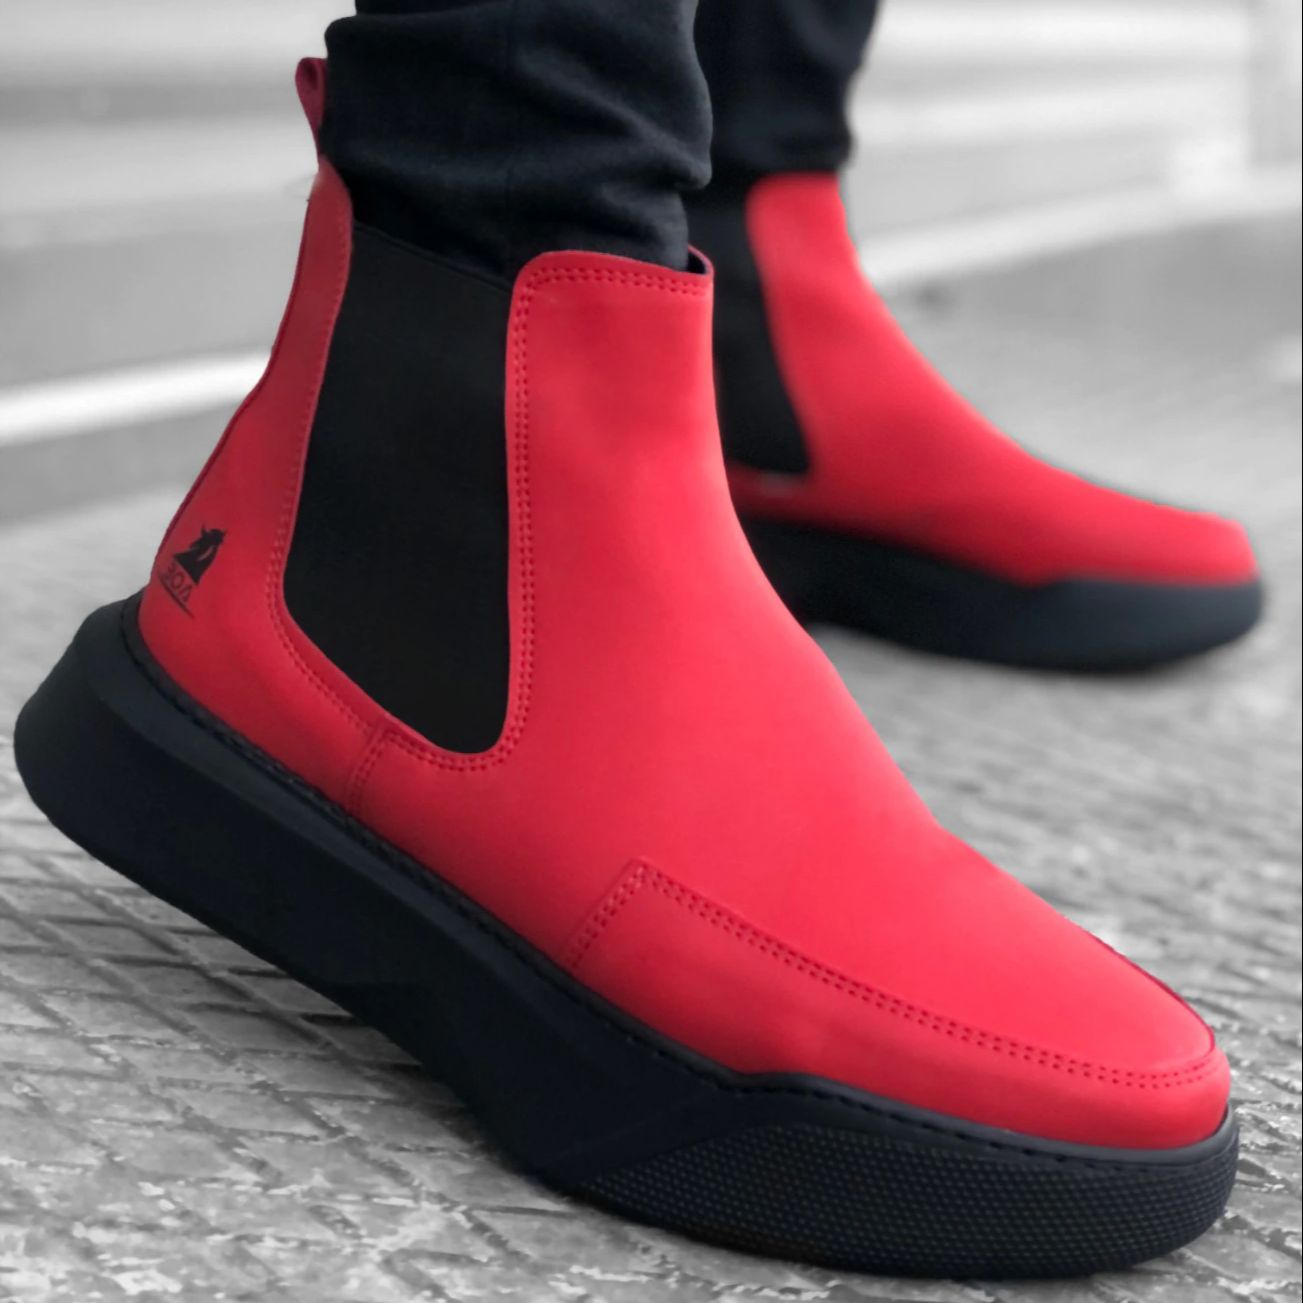 2021 Winter Men's Boots New Model High-Sole Luxury Brand Lace-Up Shoes Trendy Faux Leather Casual Design Lightweight Hiking Waterproof Sneakers Ba0150 Step-in Red Sports Male